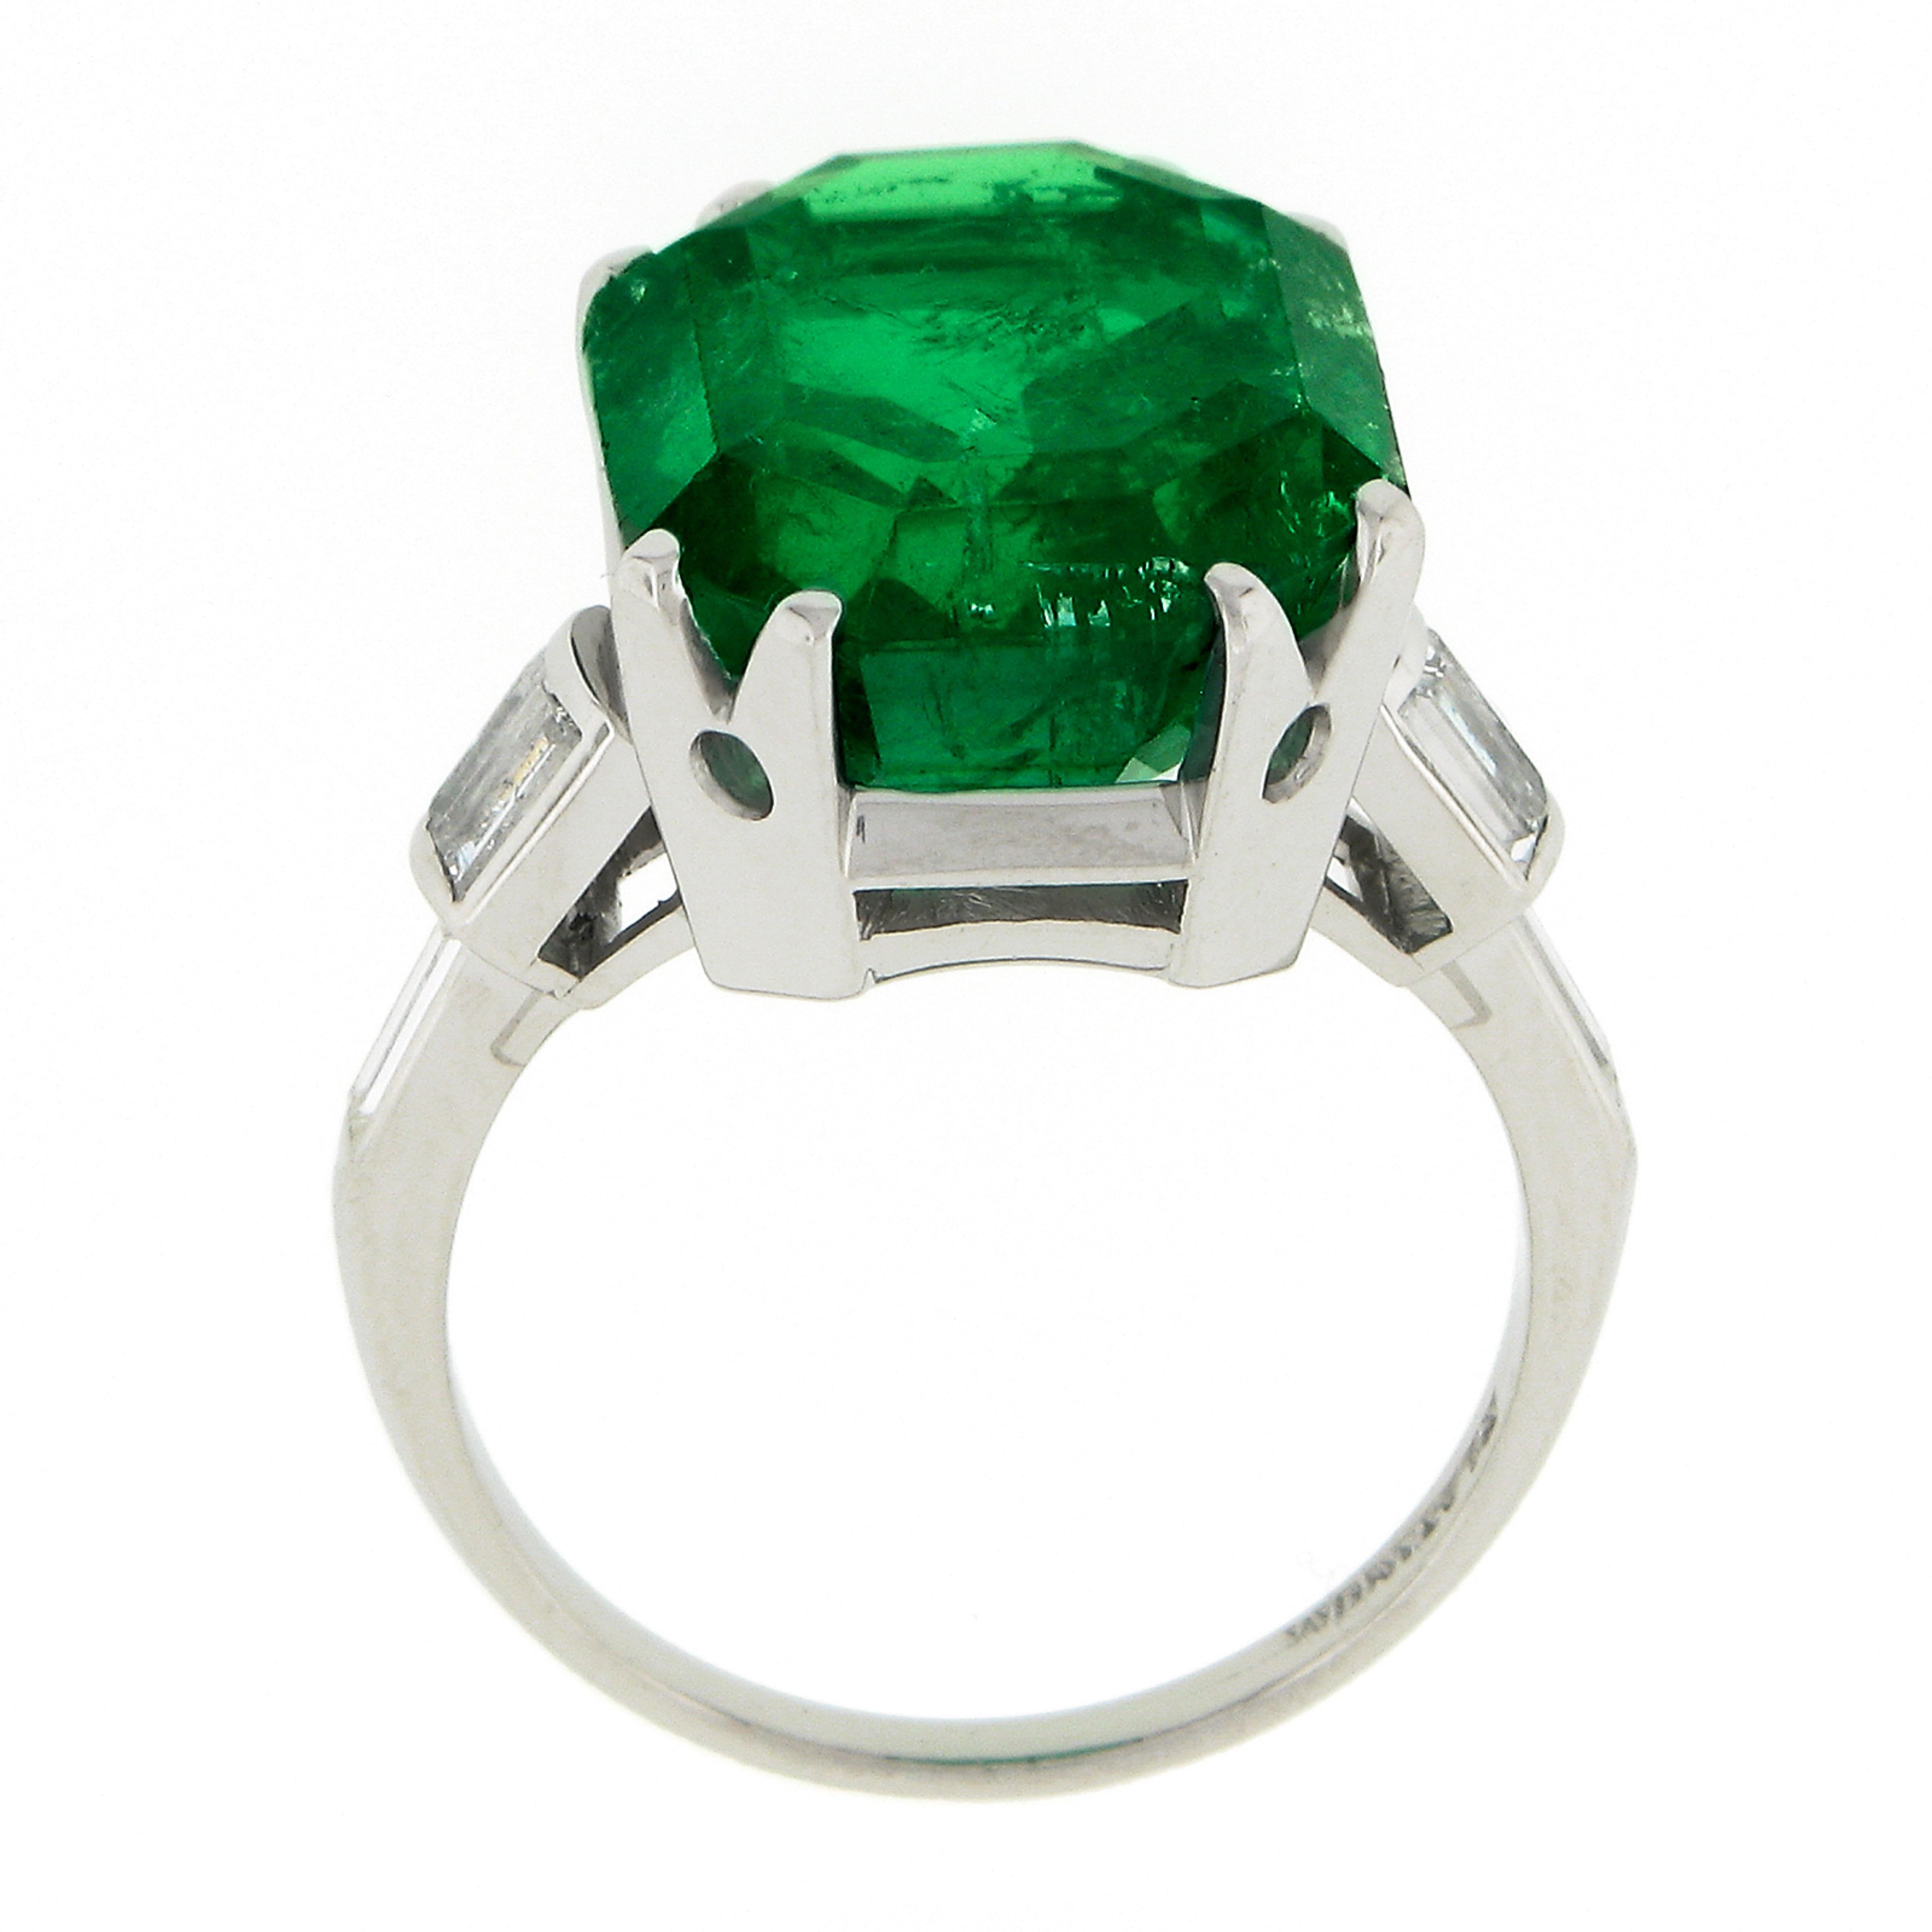 Vintage Platinum 12.16ct AGL Emerald Cut Colombian Emerald Diamond Cocktail Ring For Sale 6